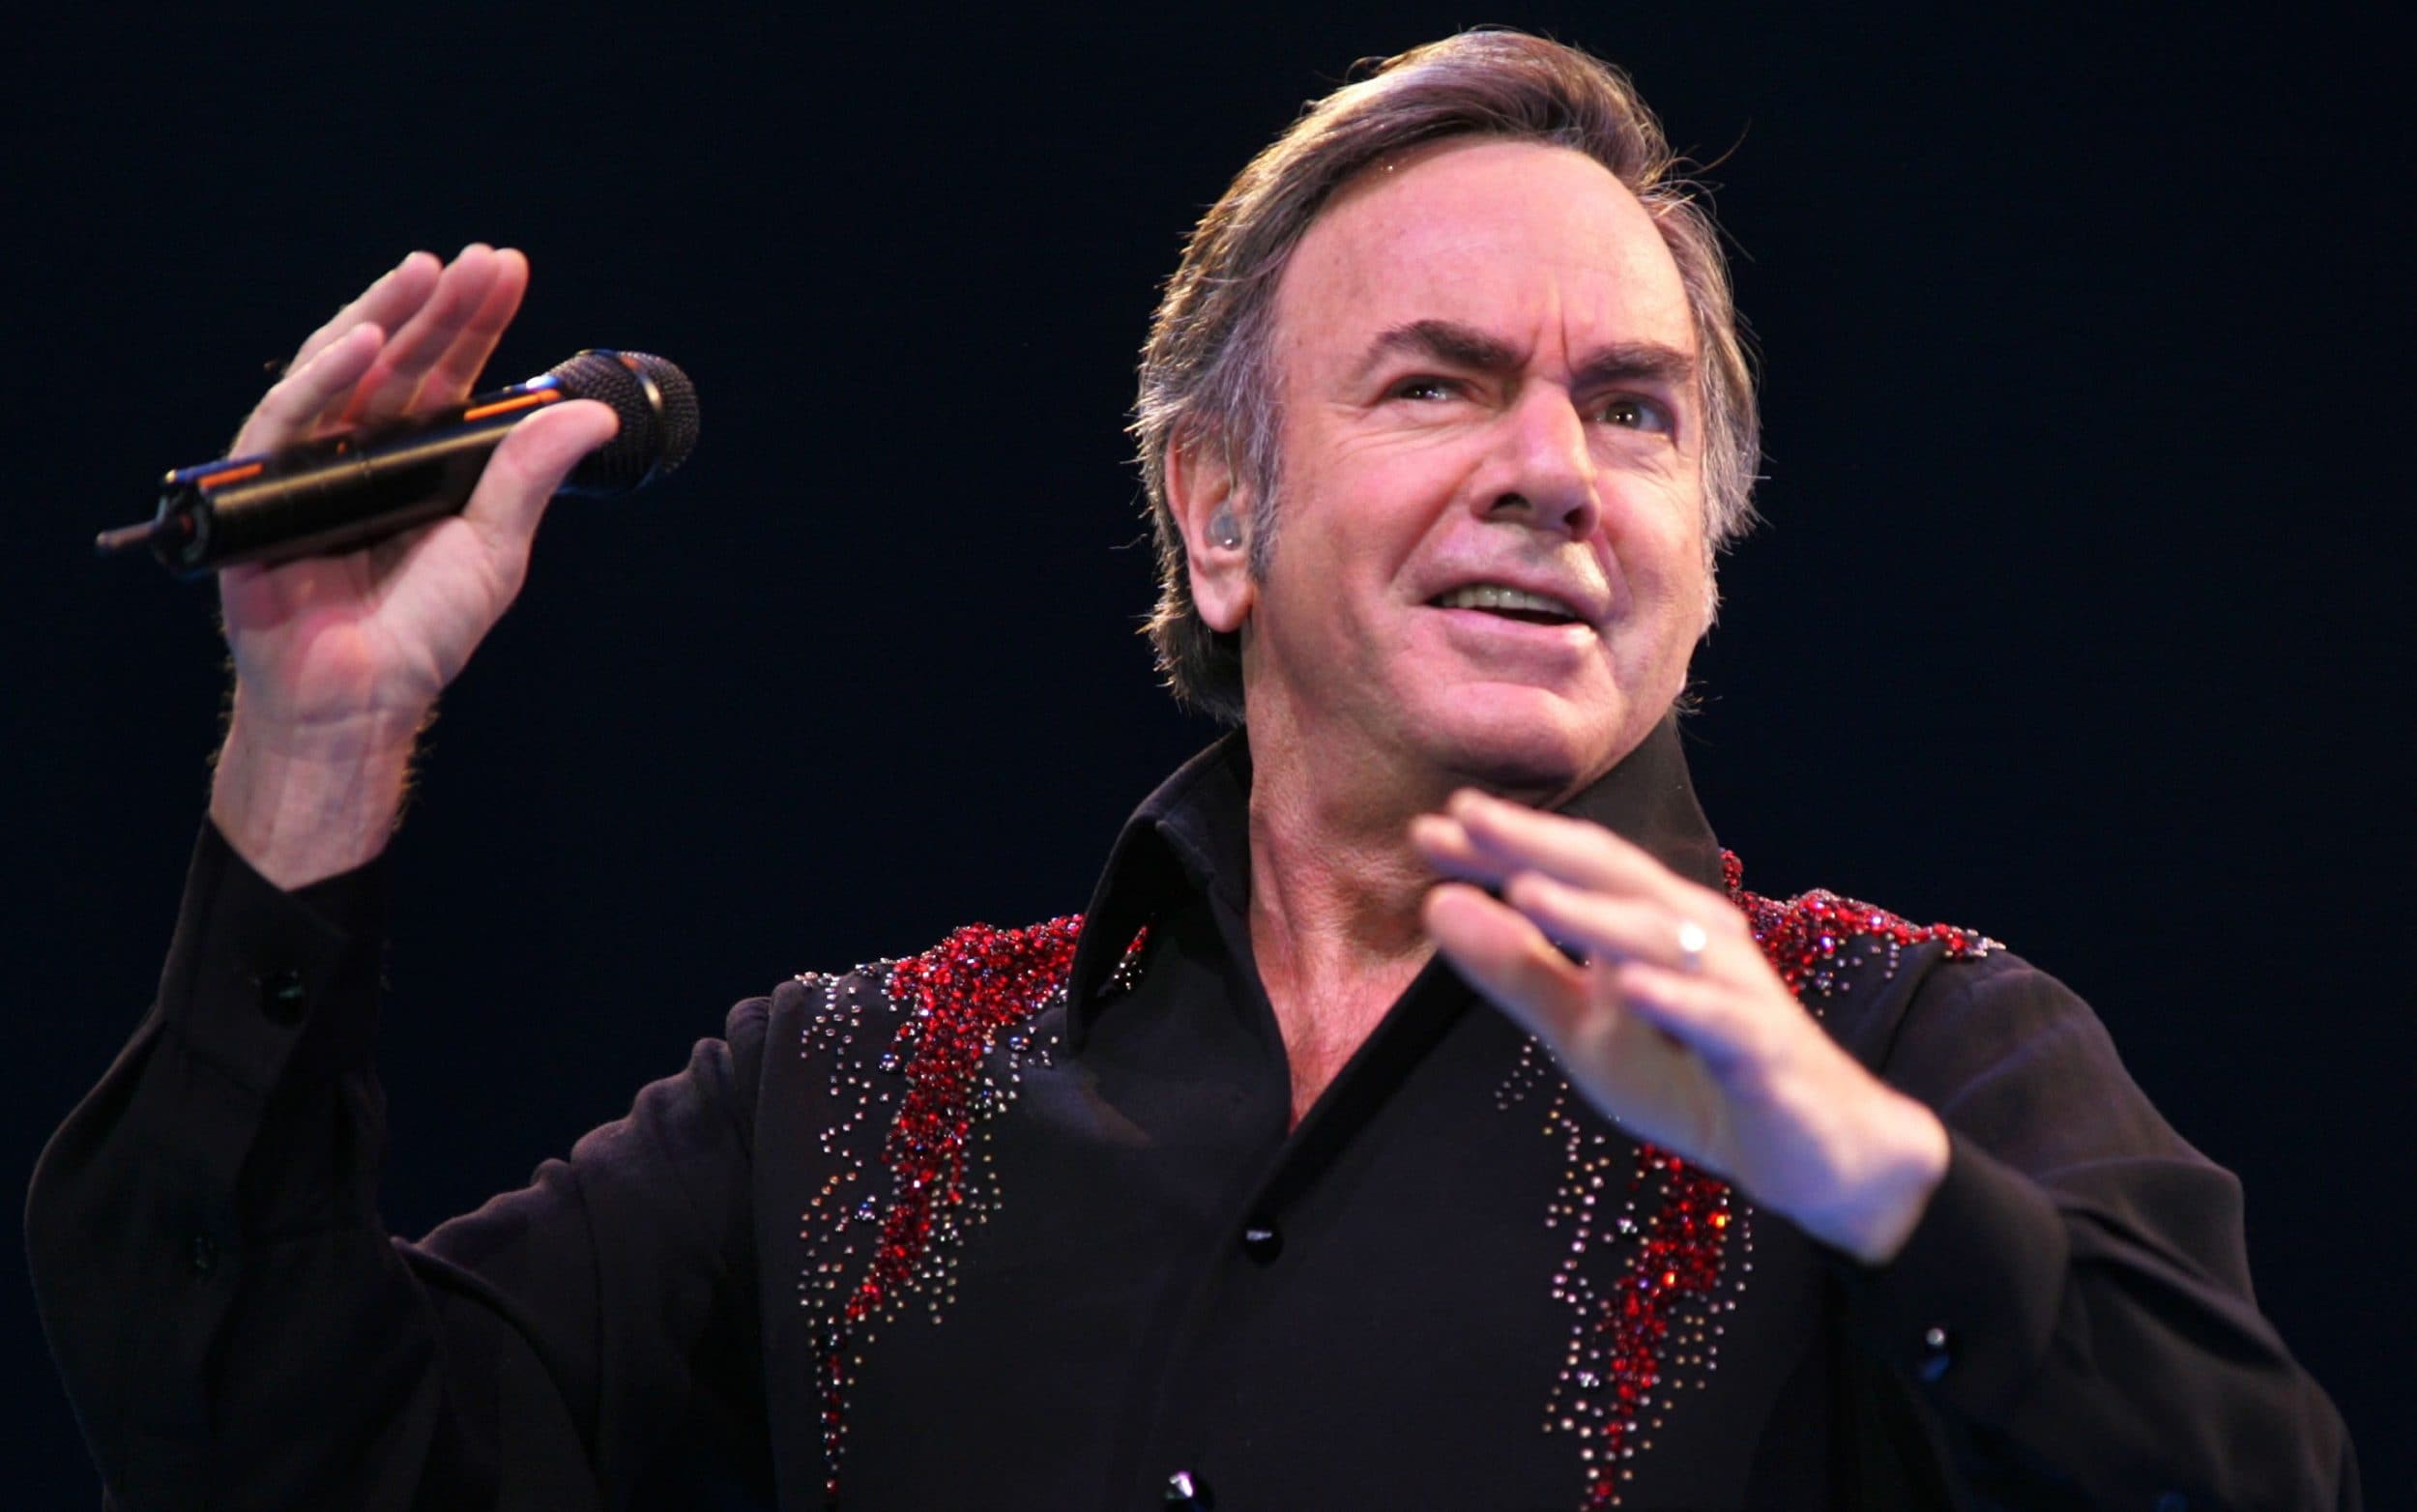 The significance of Neil Diamond’s 1969 song